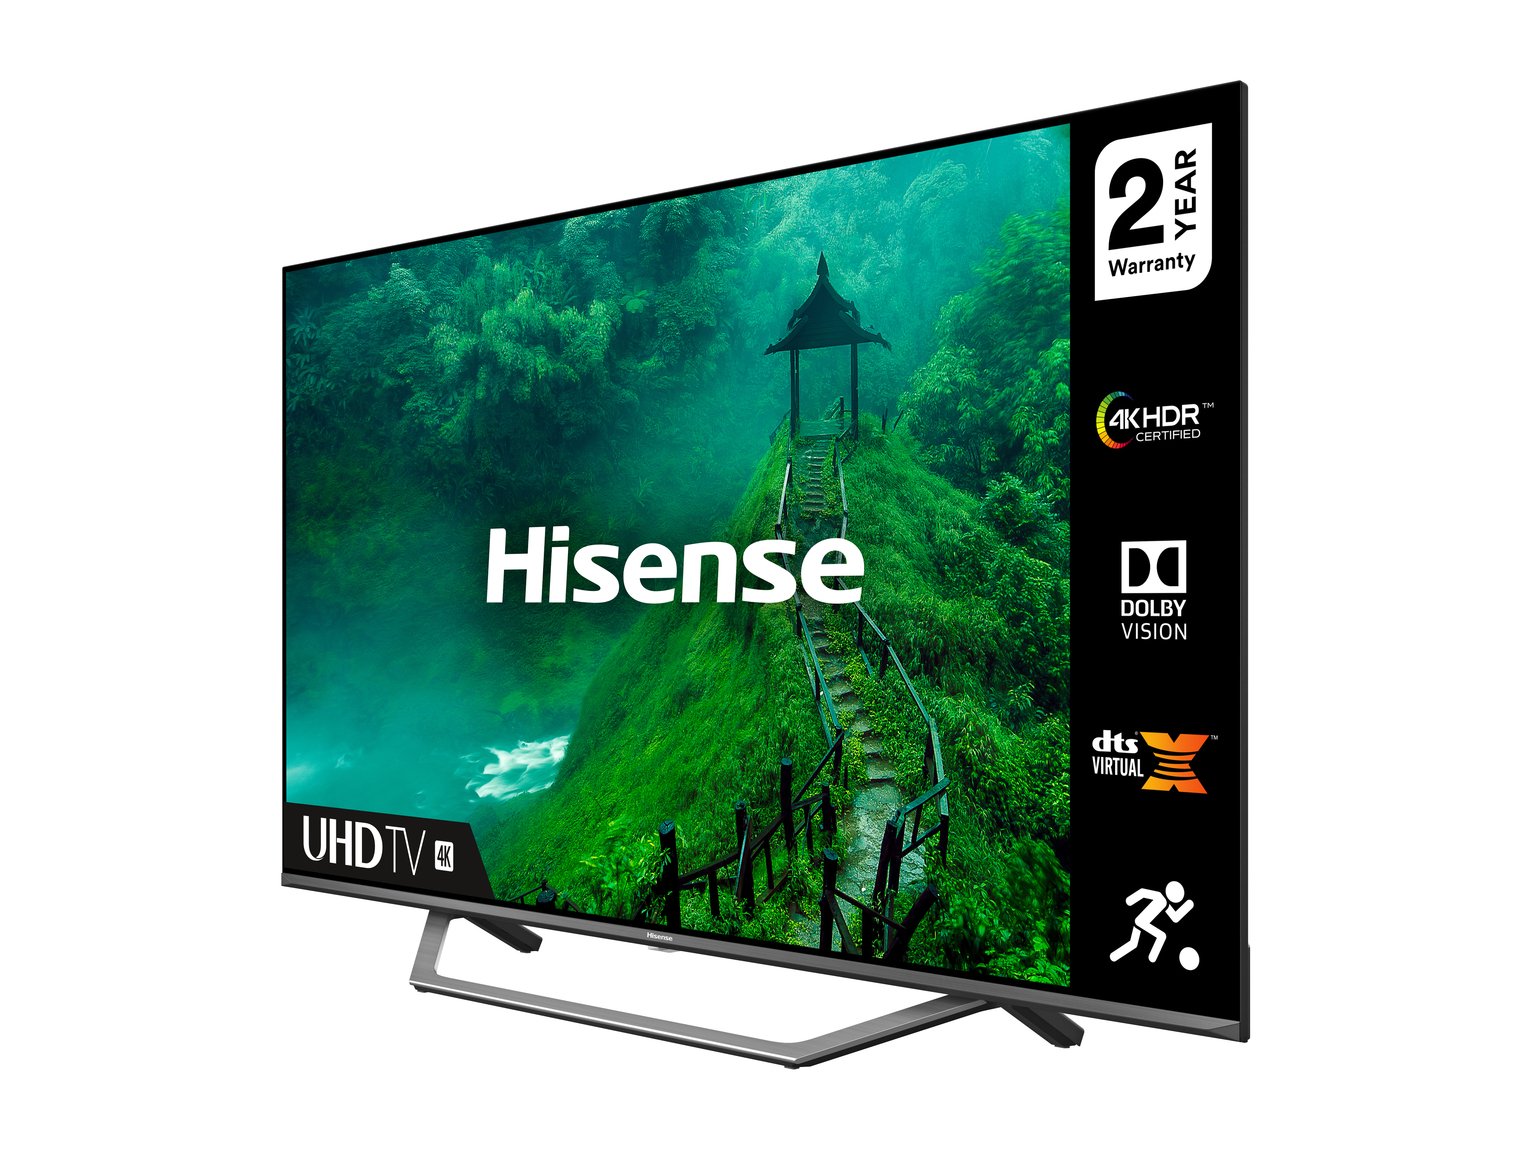 Hisense 65AE7400FT 65 Inch Smart 4K Ultra HD LED TV with HDR Review